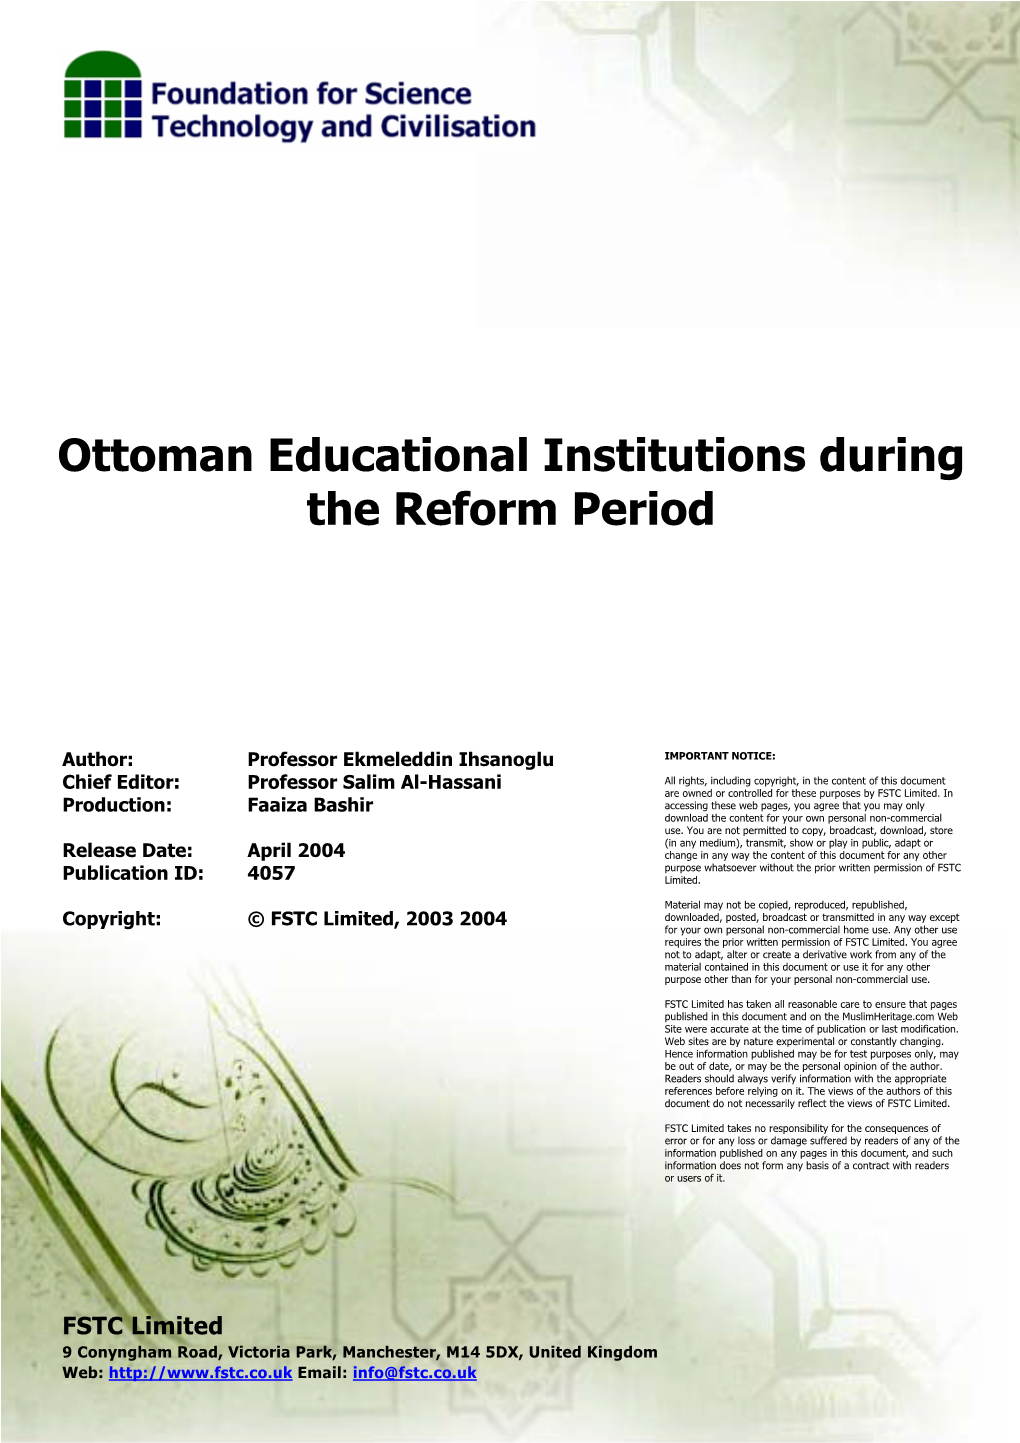 Ottoman Educational Institutions During the Reform Period